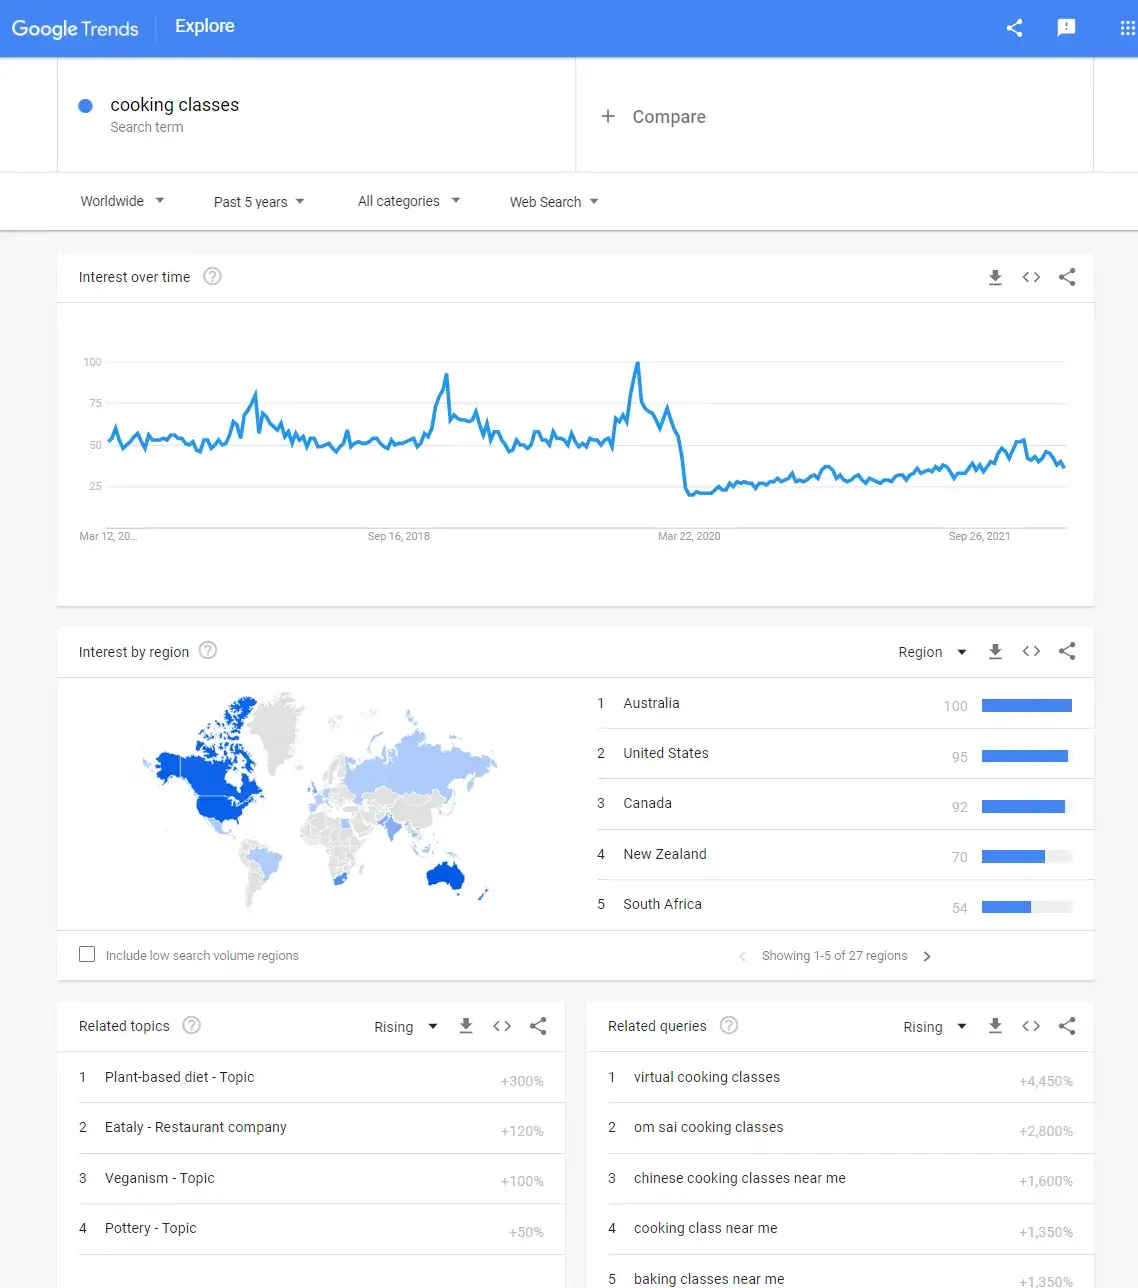 Google Trends results for cooking classes as an example on searching for SEO opportunities.